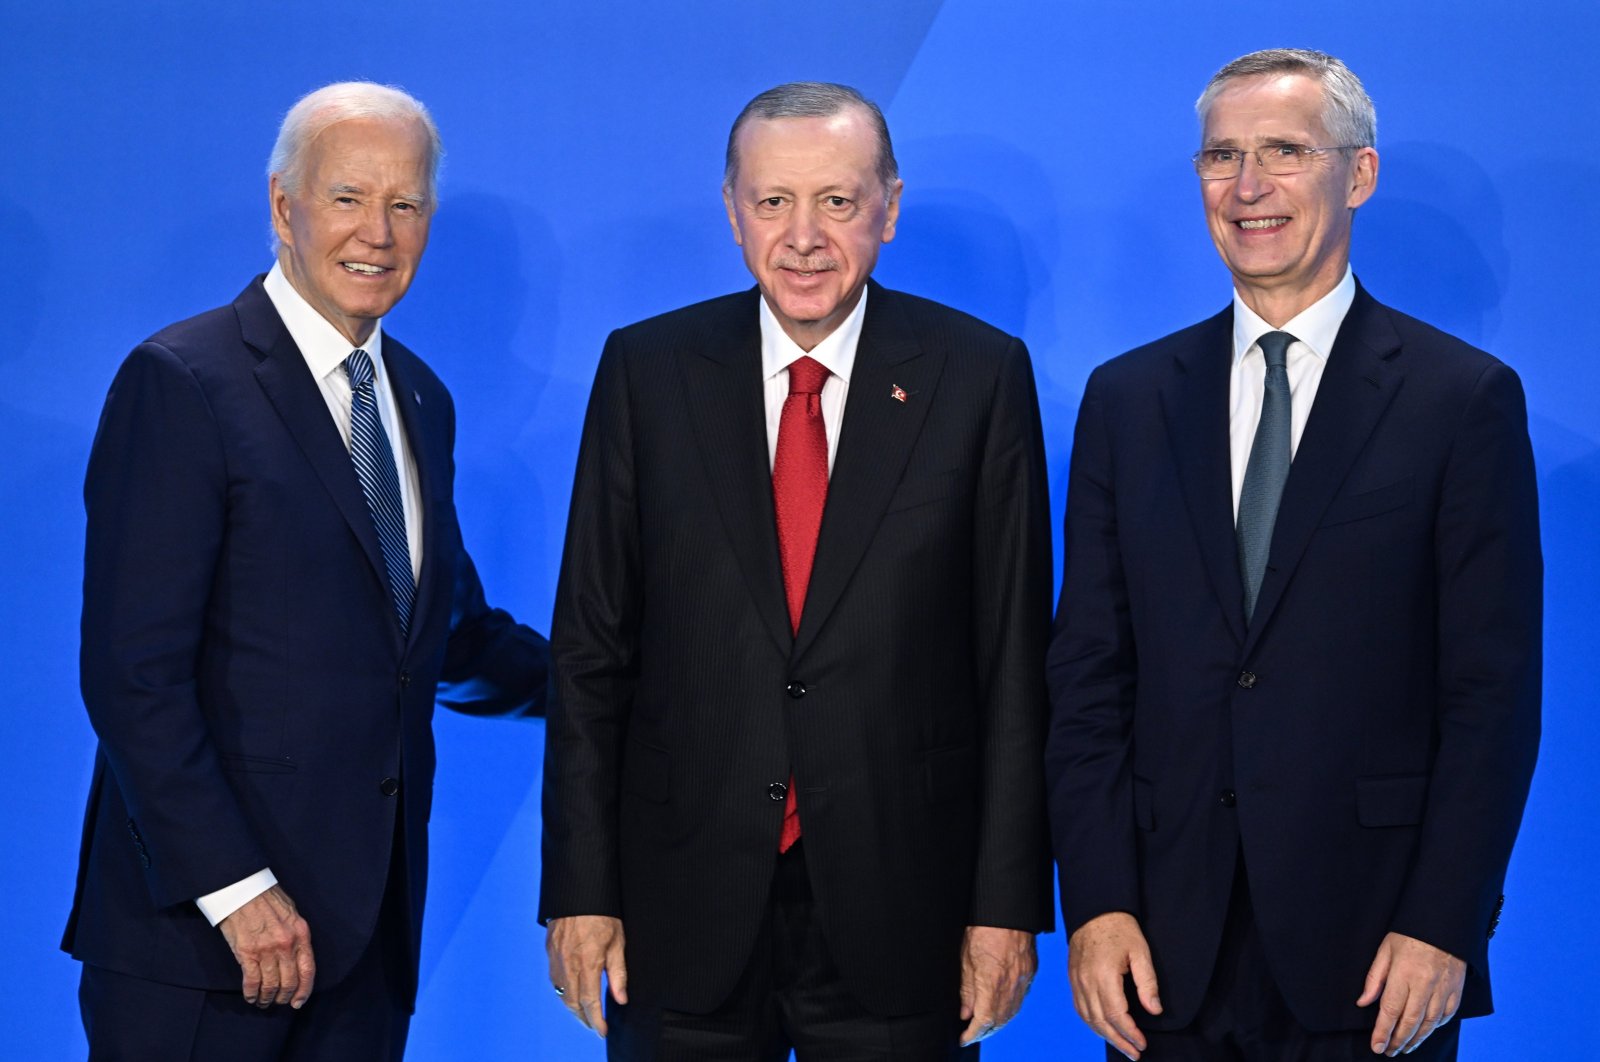 President Recep Tayyip Erdoğan stands with U.S. President Joe Biden and NATO Secretary General Jens Stoltenberg during the welcome ceremony for NATO’s 2024 annual meeting in Washington, D.C., July 10, 2024. (EPA Photo)